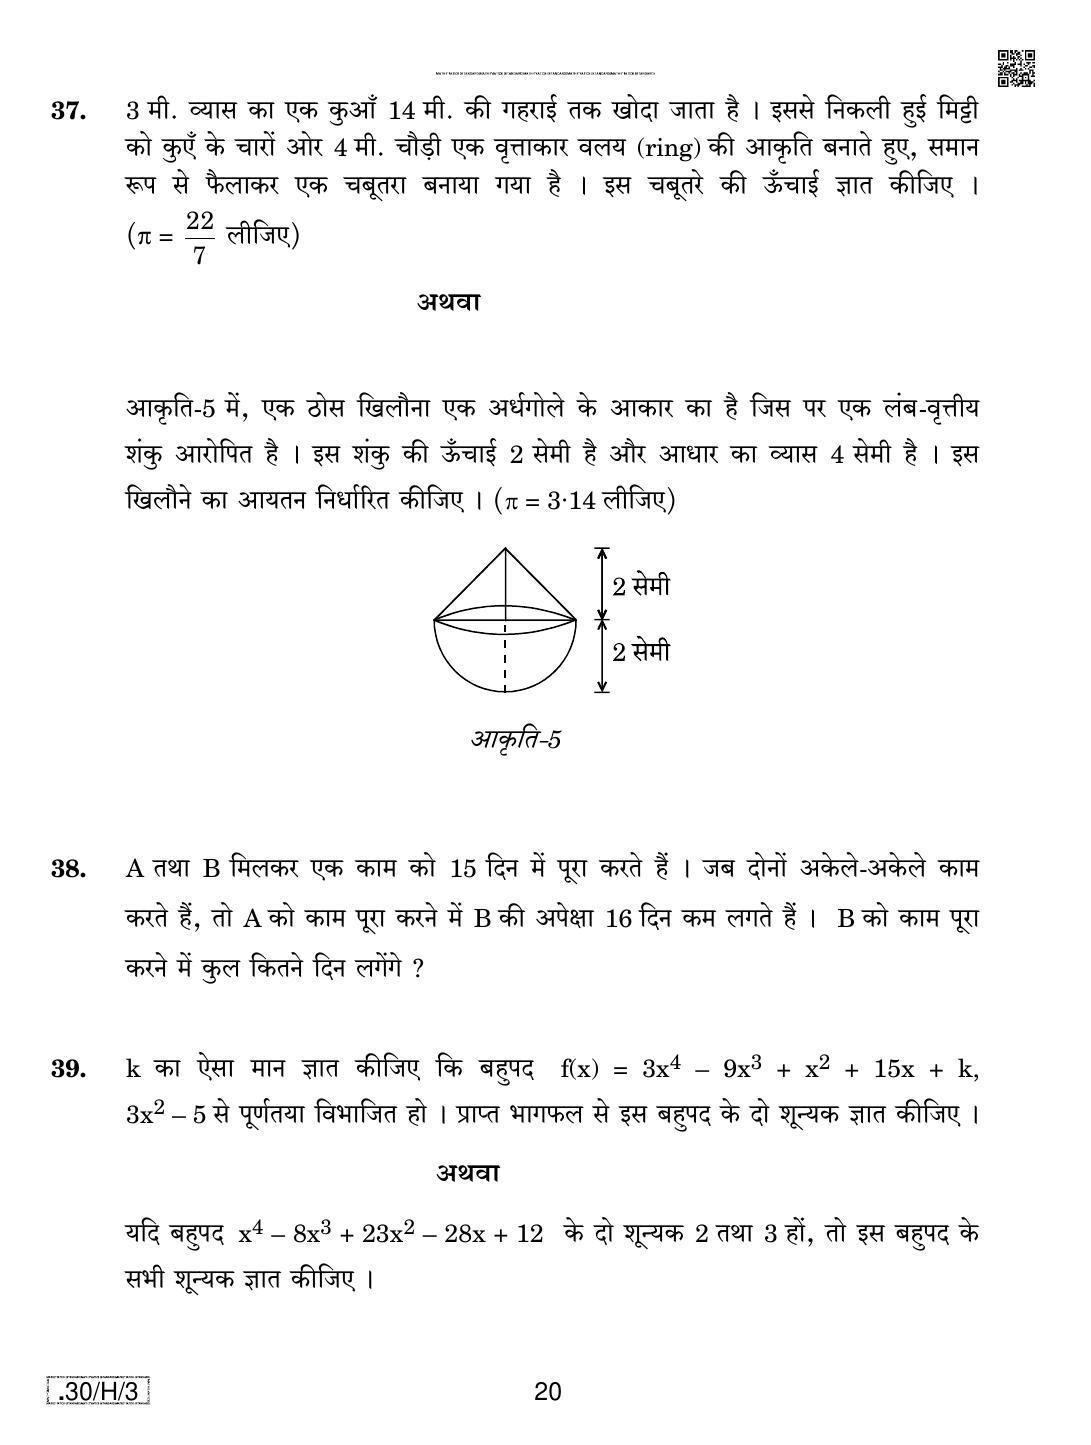 CBSE Class 10 30-C-3 - Maths (Standard) 2020 Compartment Question Paper - Page 20